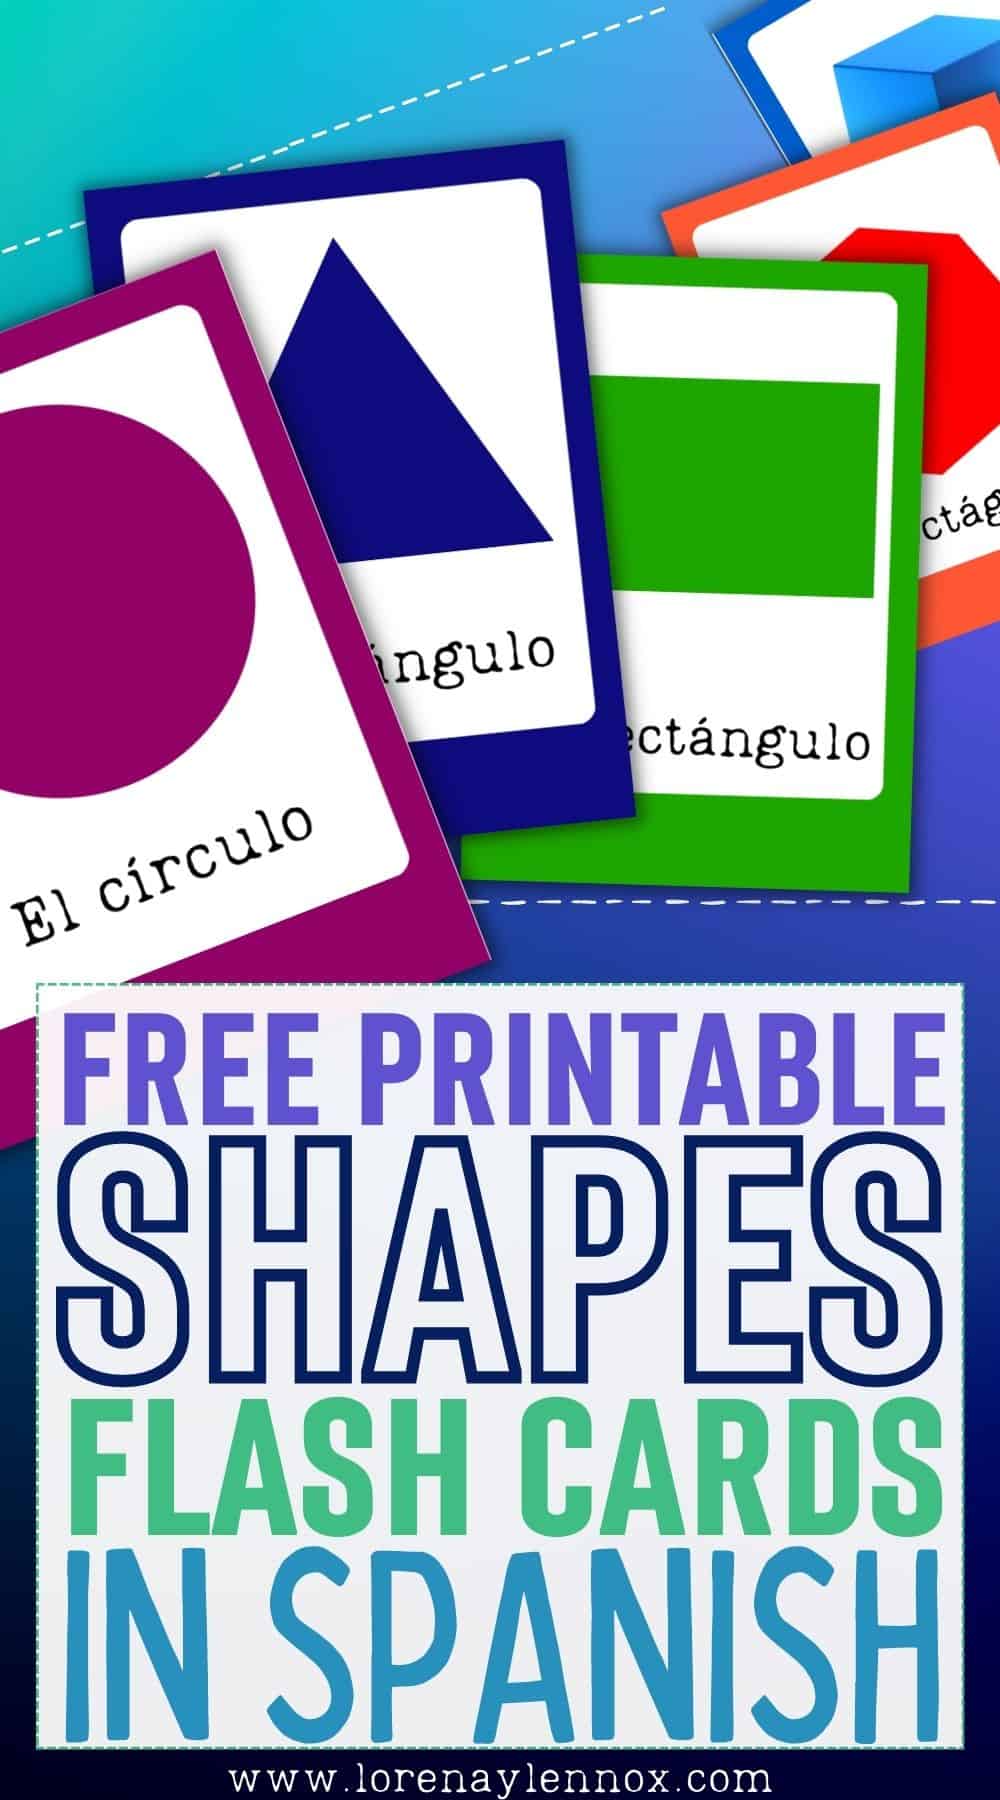 Downloadable Printable Shapes Flash Cards in Spanish